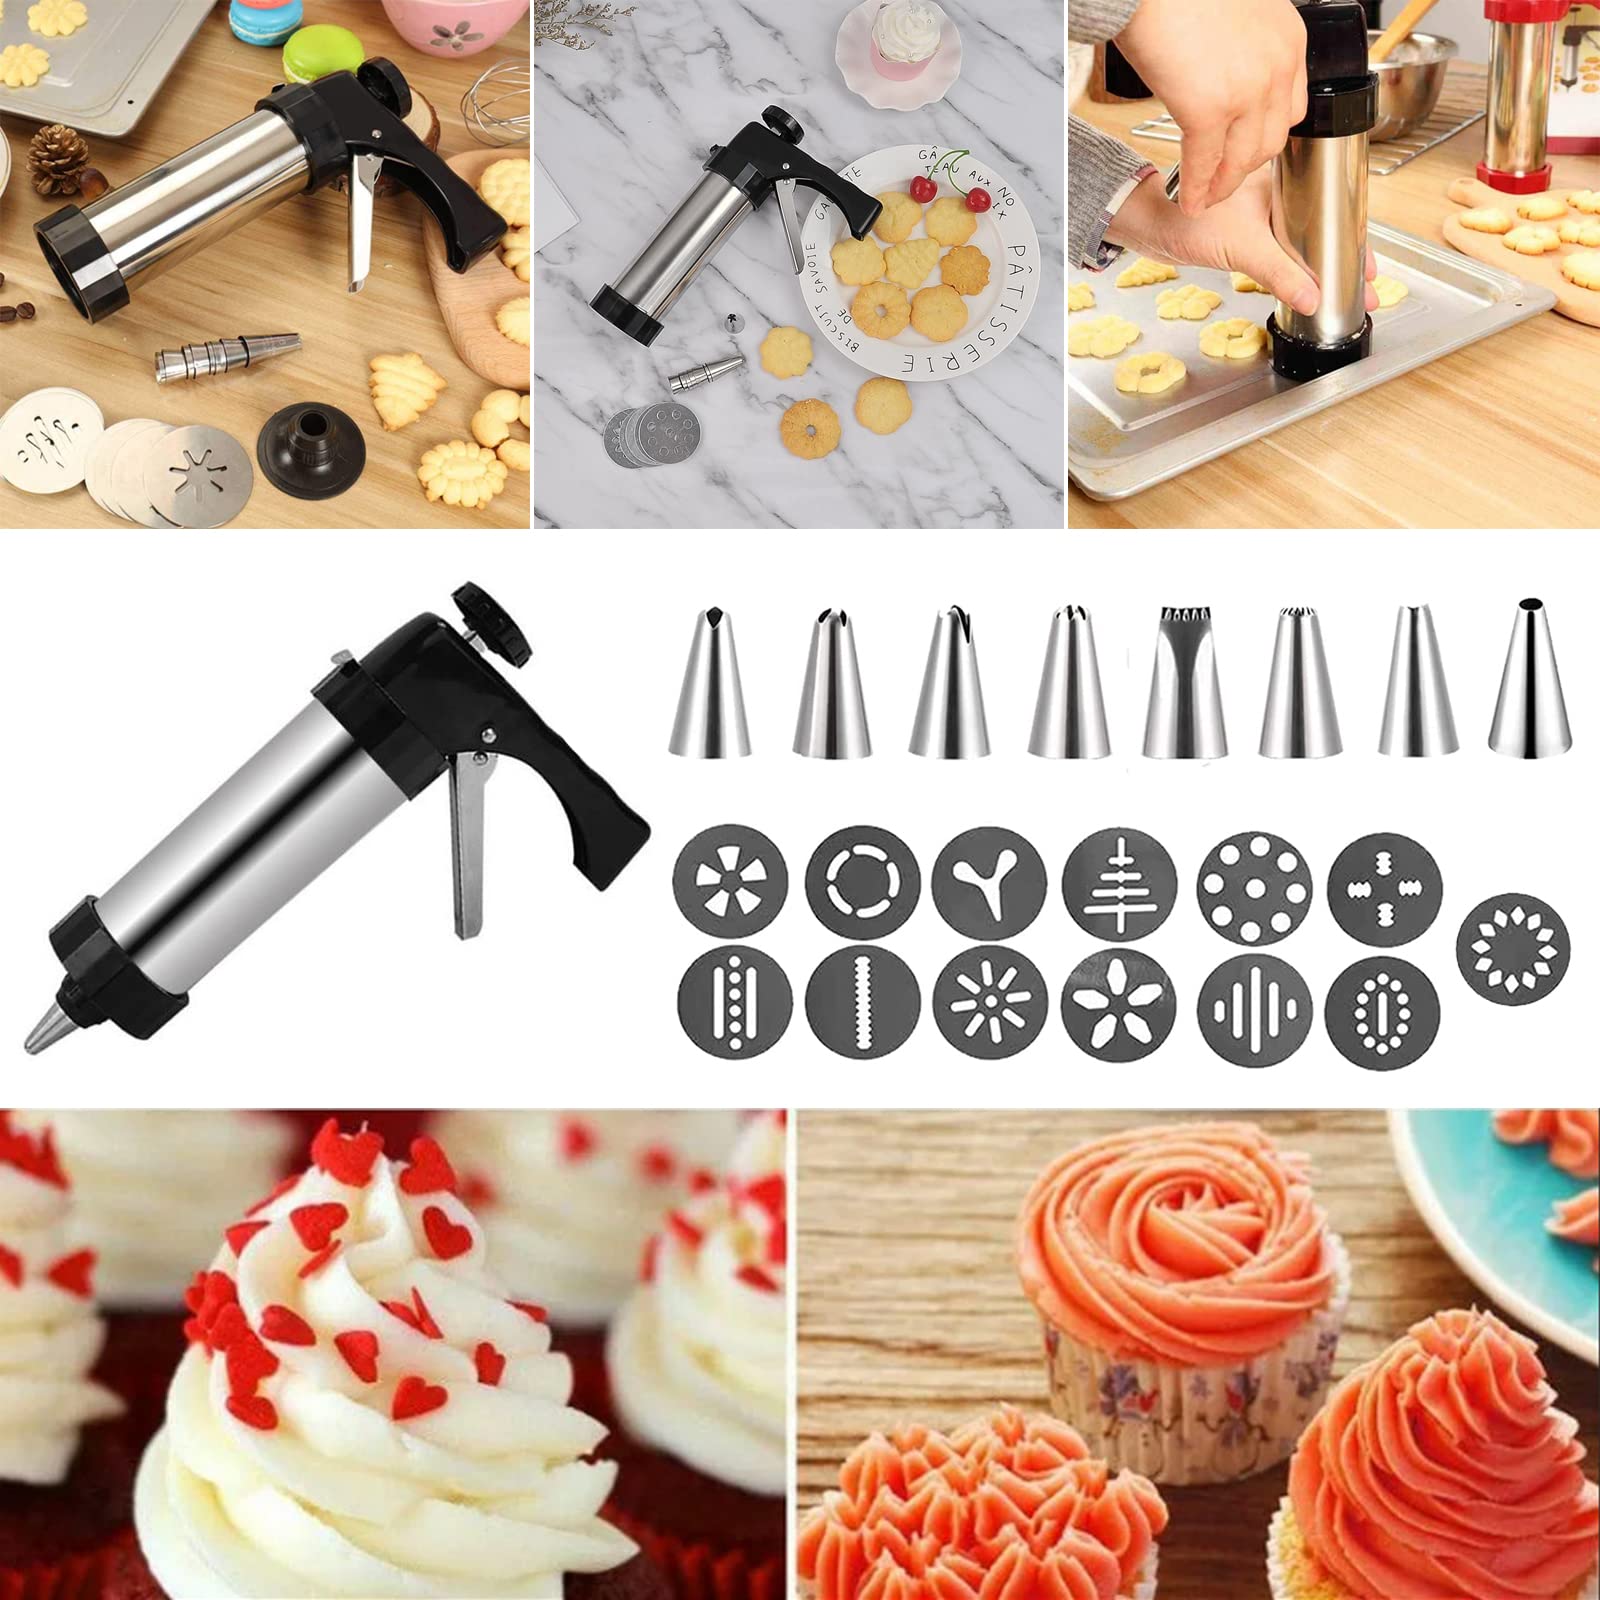 FMLBRDS Cookie Press Gun Kit Biscuit Maker Stainless Steel Cookie Press with 13 Discs and 8 Nozzles